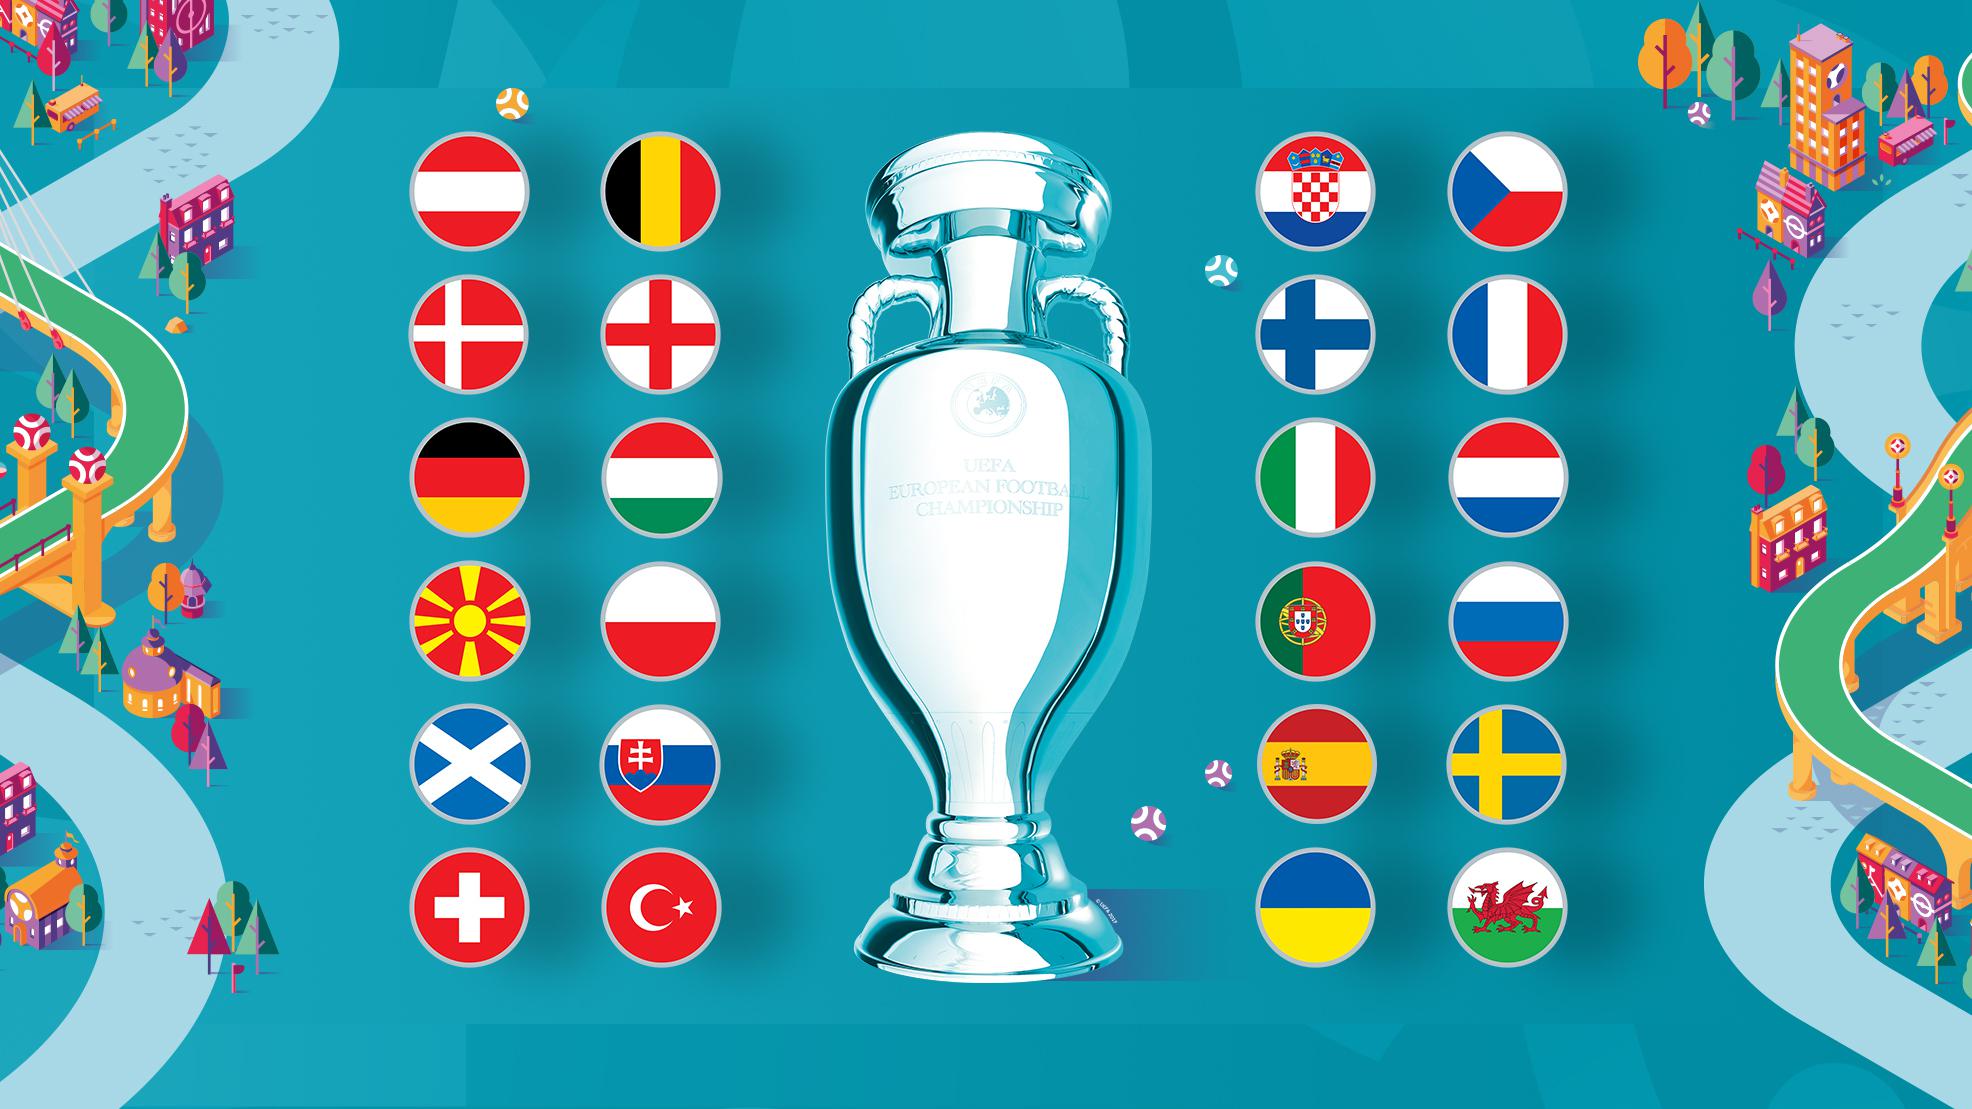 For those wishing to attend the UEFA 2020 European Football Championship